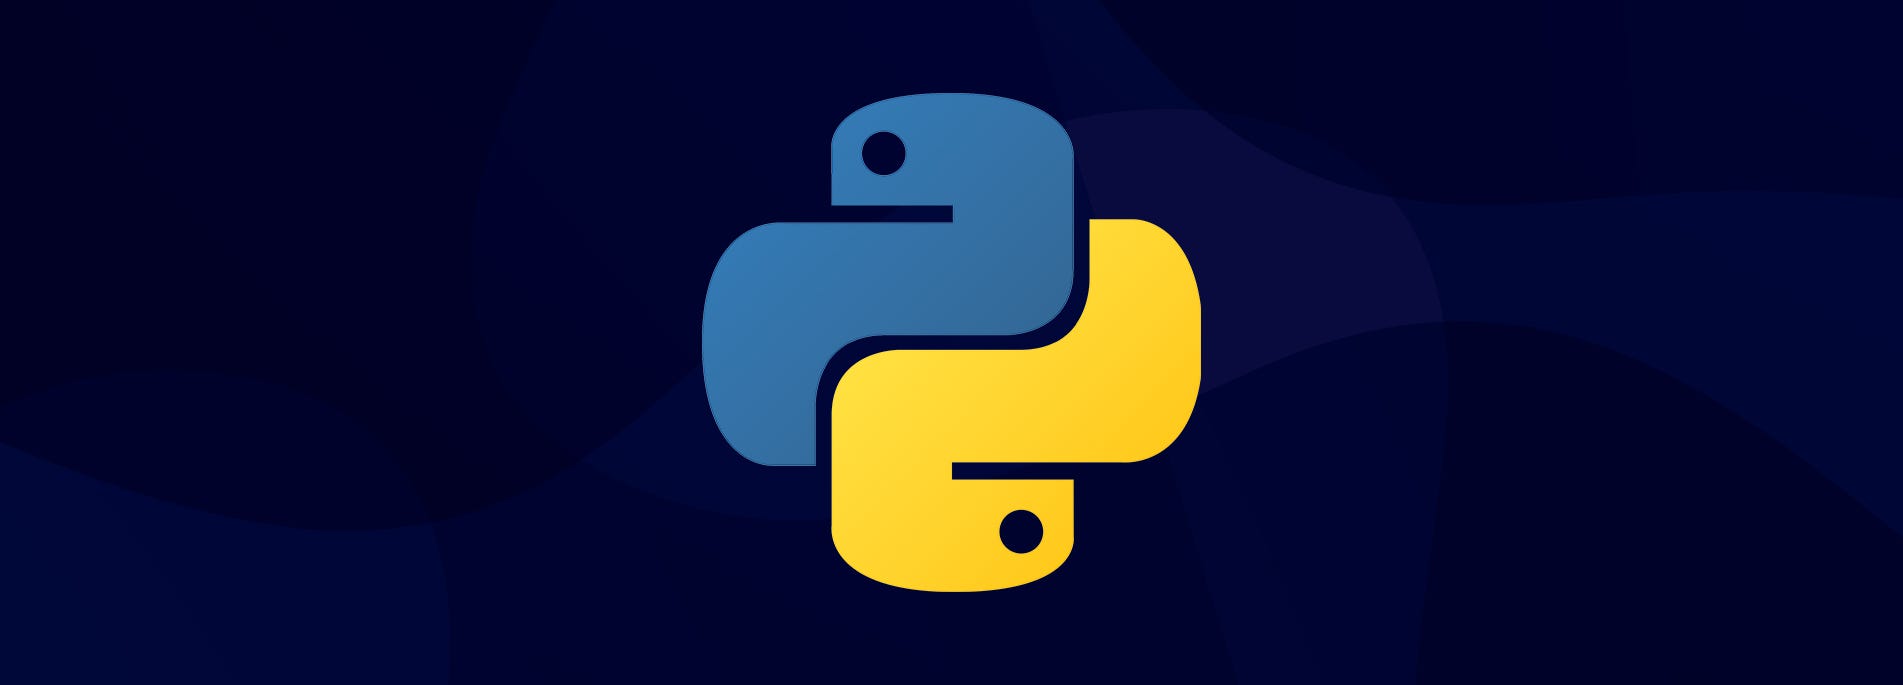 The 6 Best Python GUI Frameworks for Developers | by ResellerClub ...